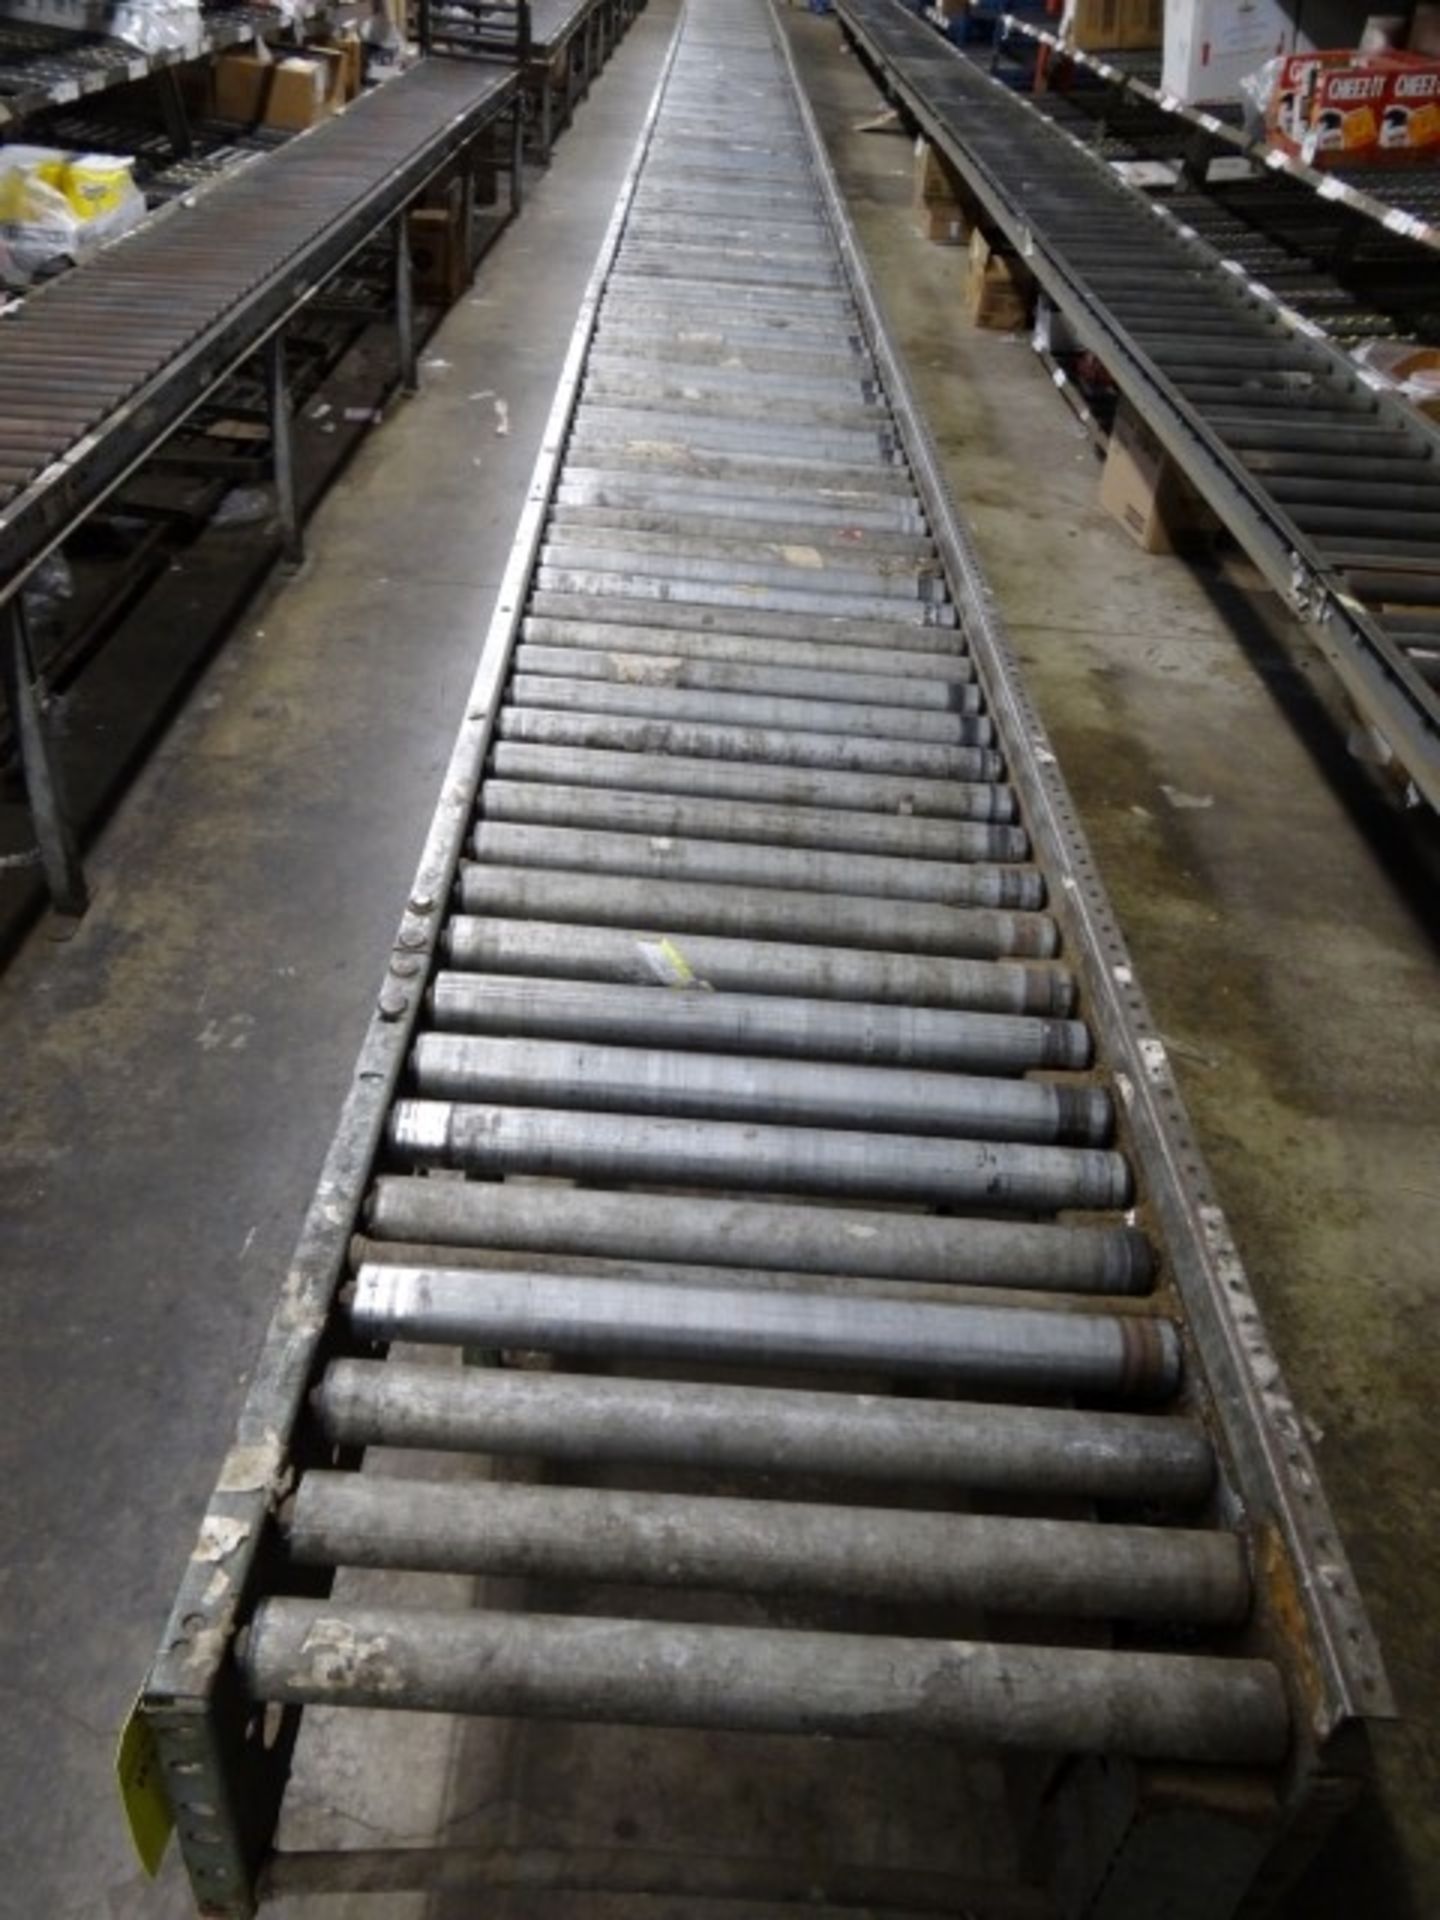 Approximately 150' of Roller Conveyor